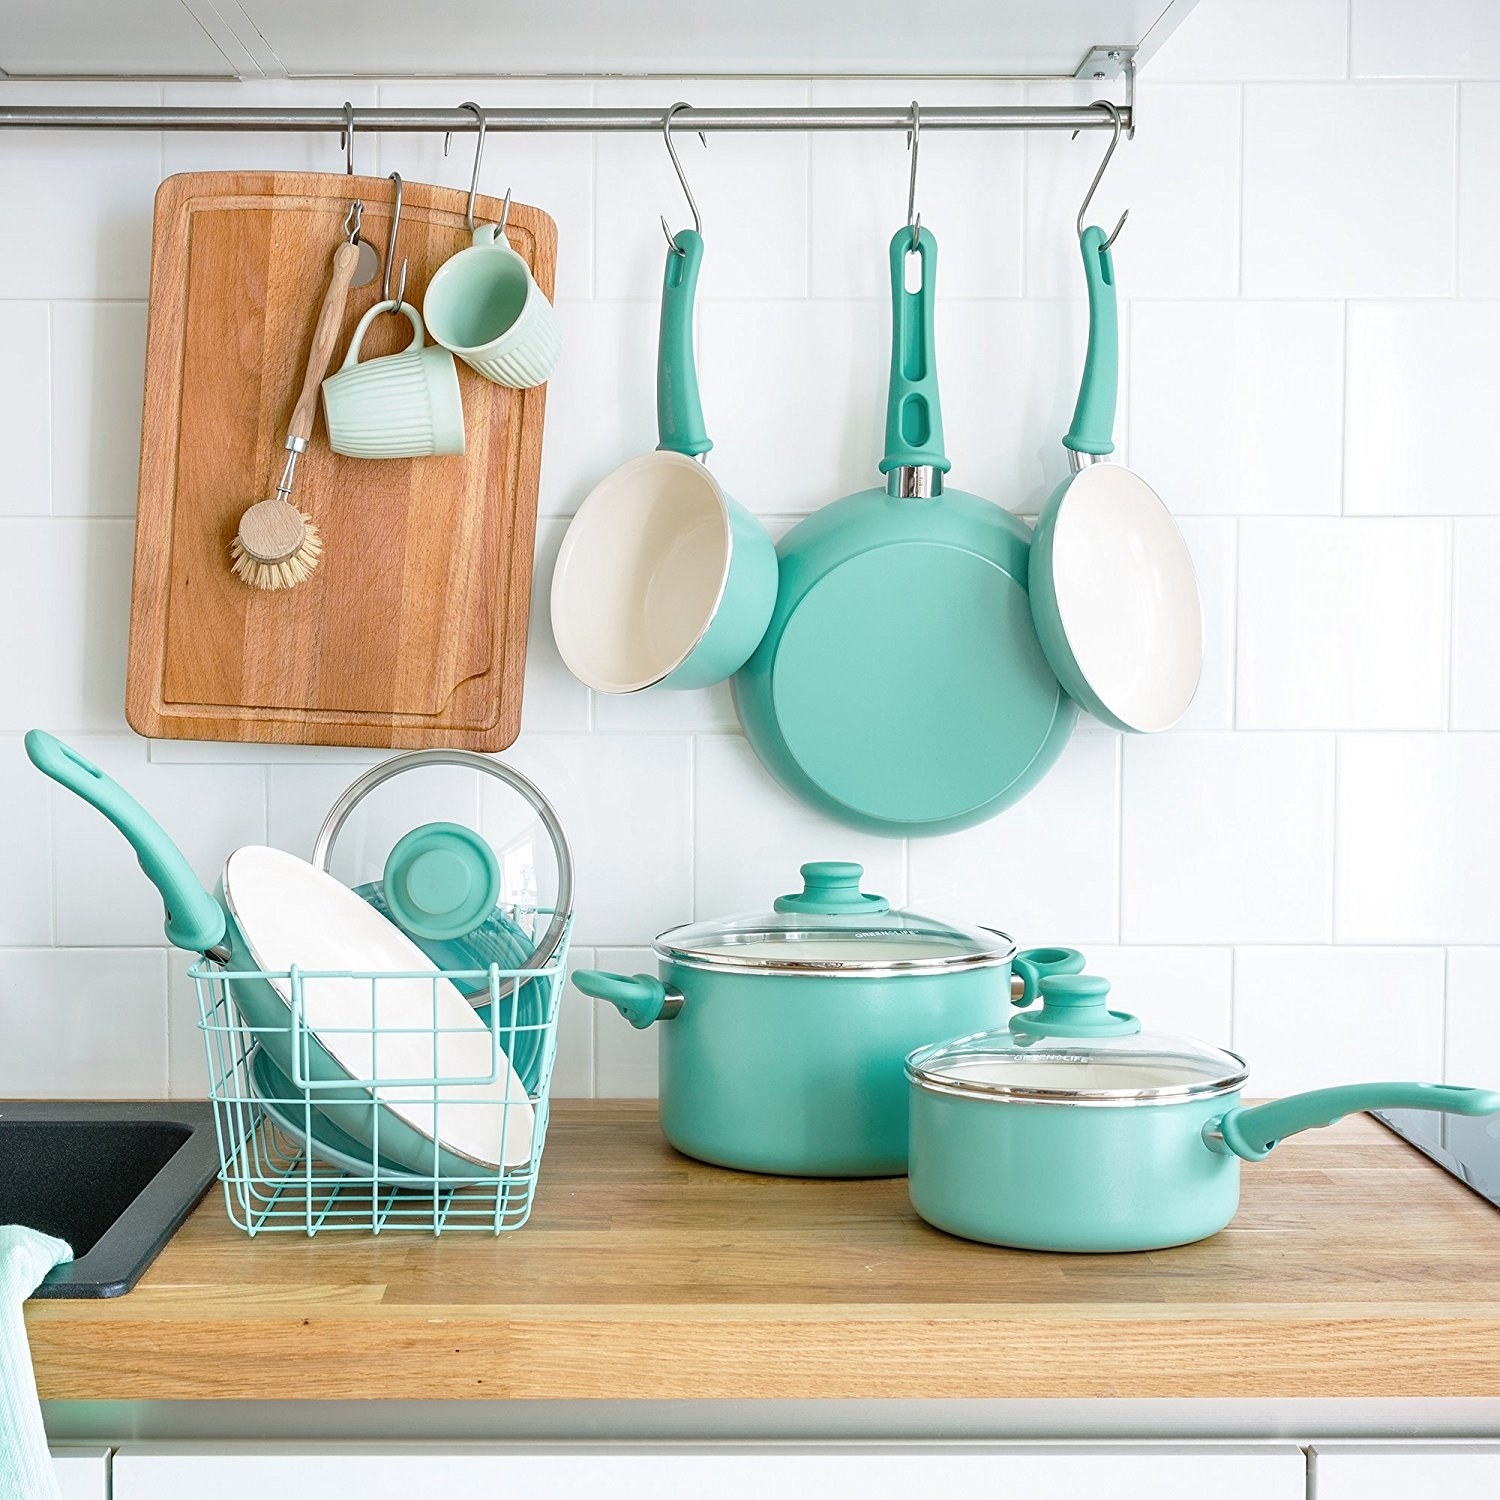 26 Kitchen Products You Need If You Love Pastel-Colored Everything